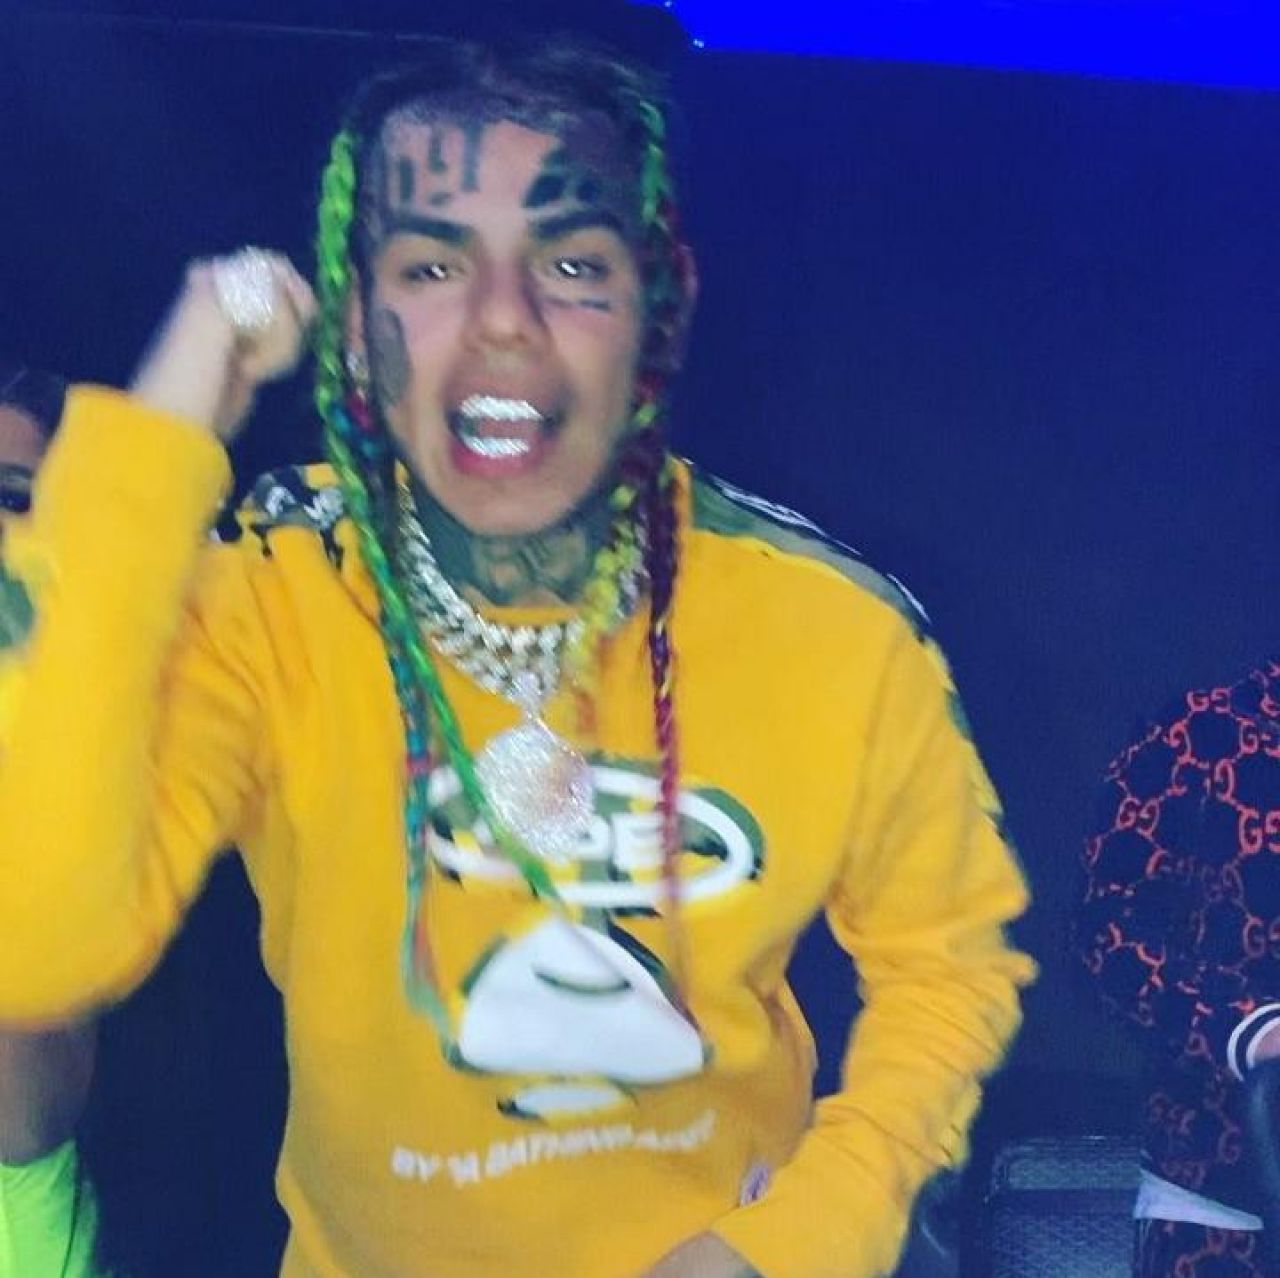 6ix9ine's yellow sweater by Bape as seen on his Instagram accoutn ...